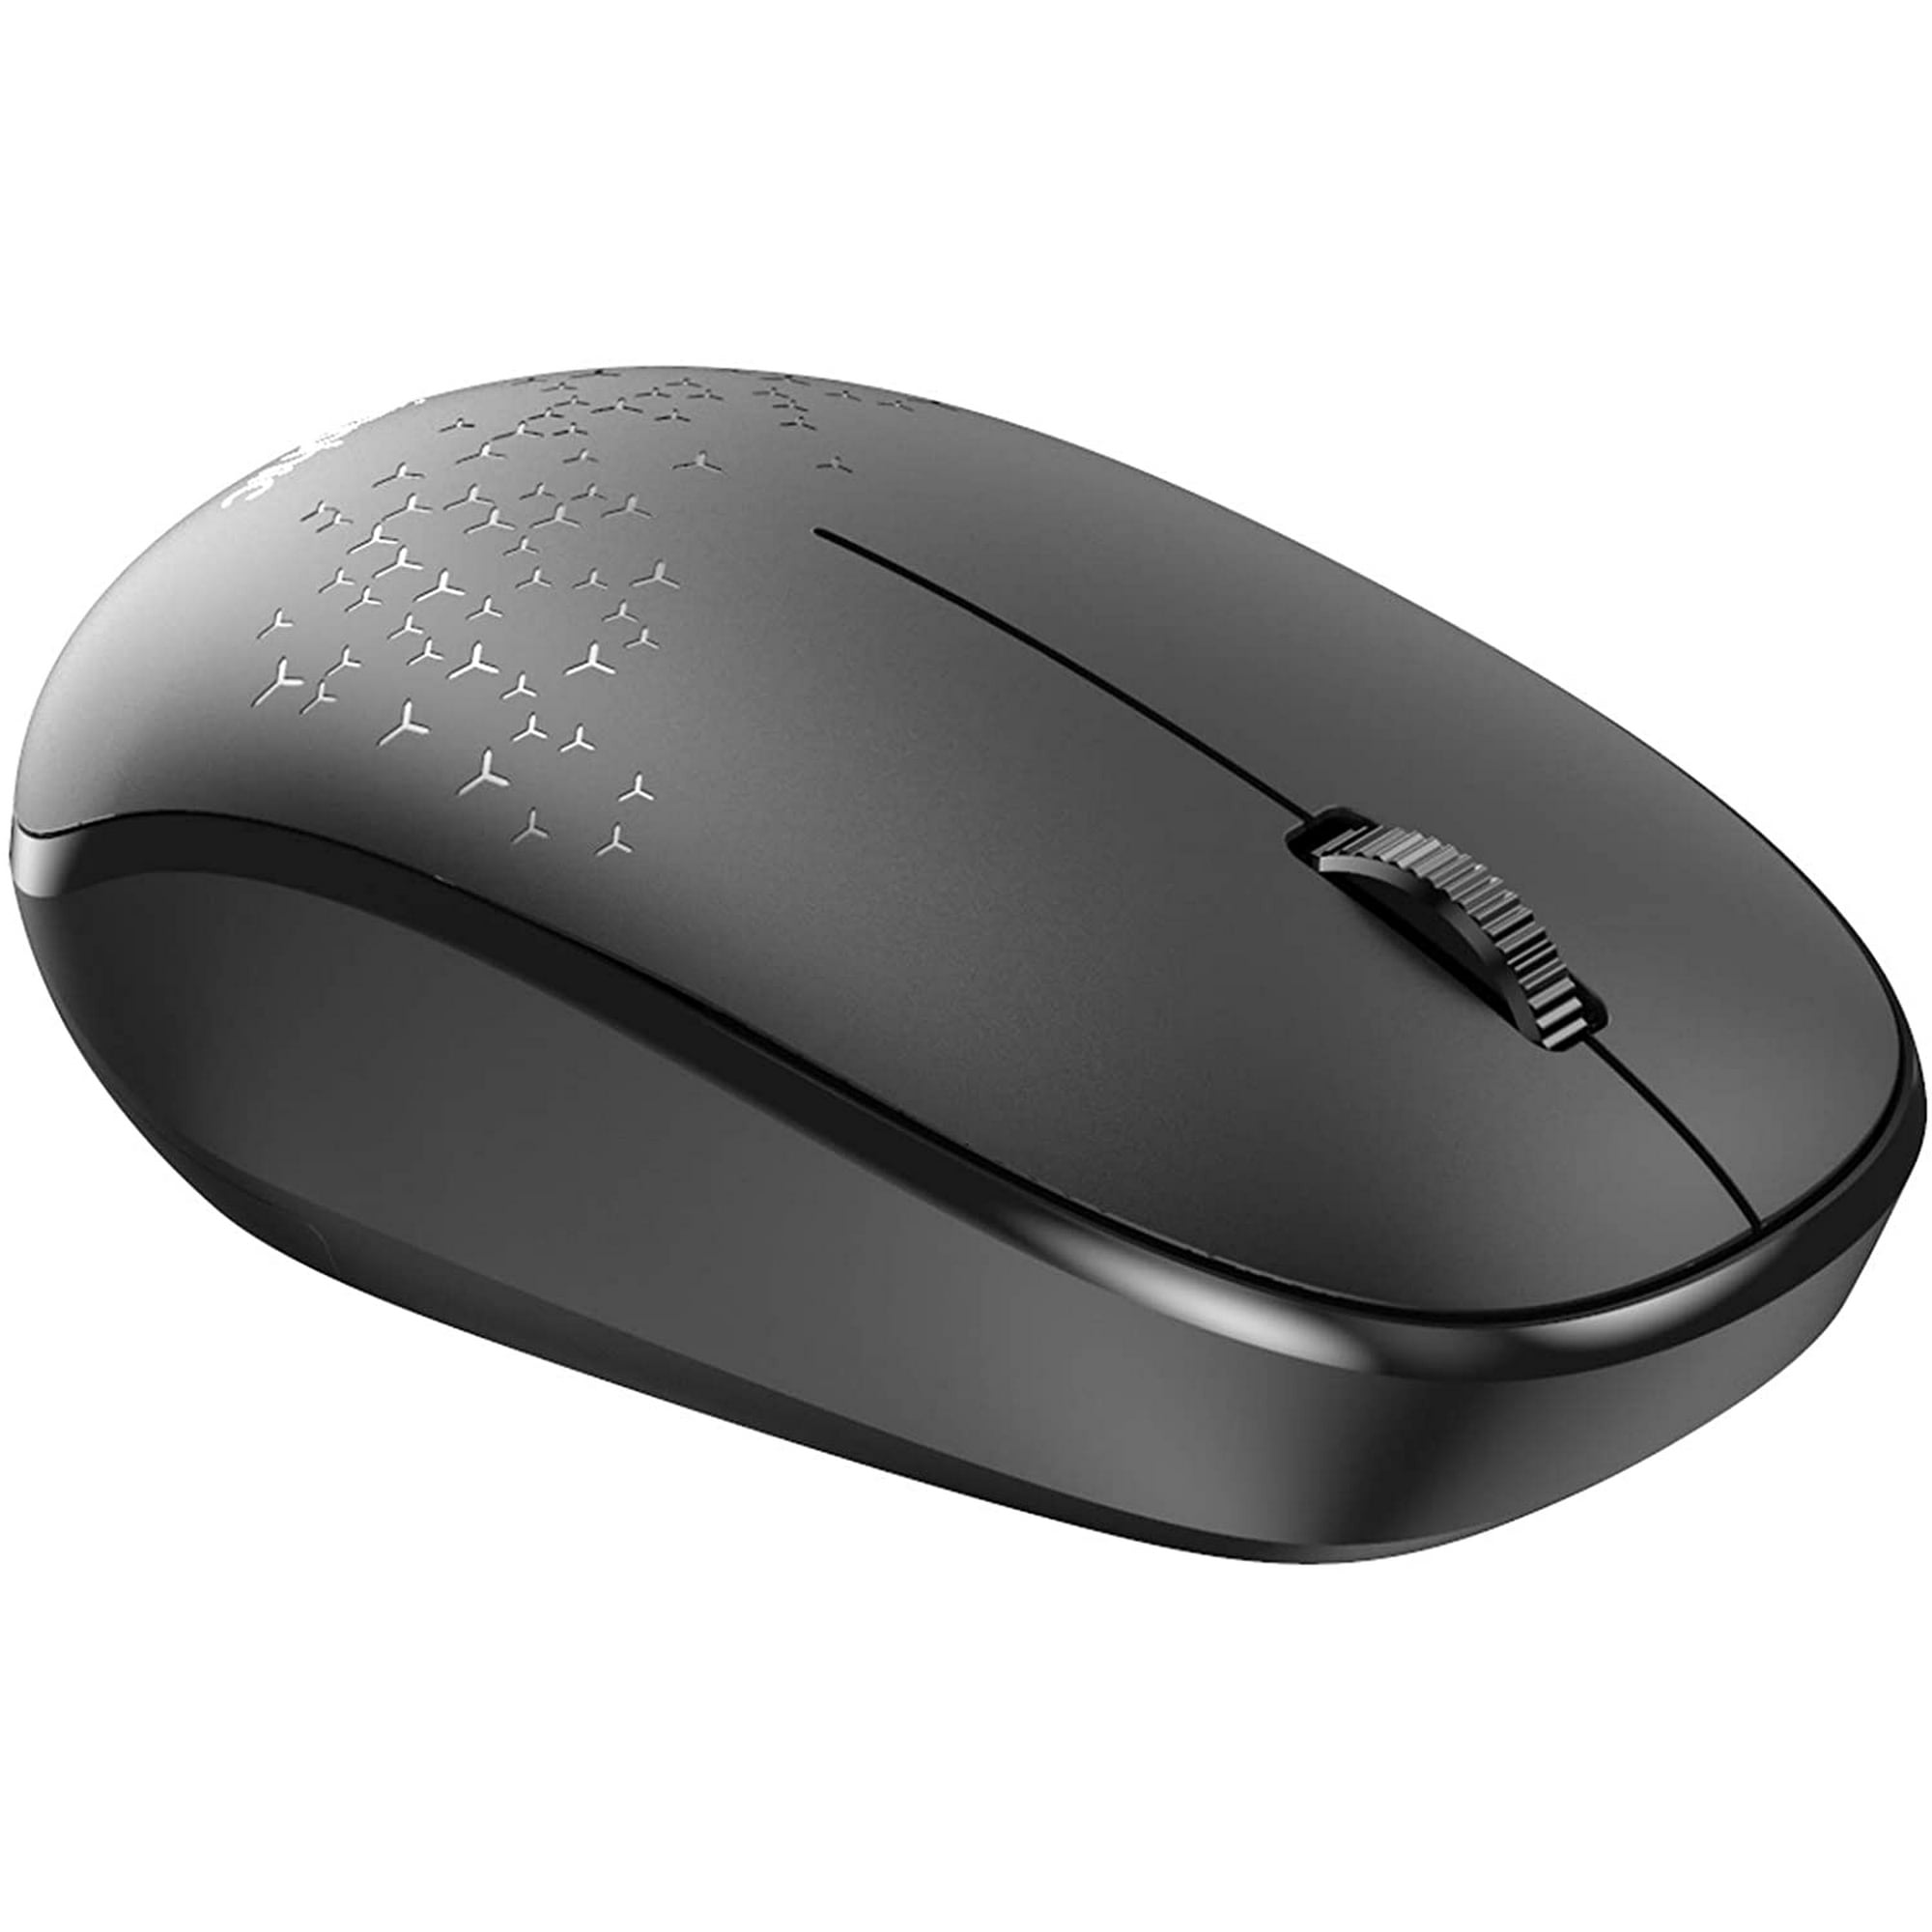 SAYDY Bluetooth Mouse Silent, Mouse Bluetooth 5.0/3.0 Dual Mode (No Receiver), Mini 1600DPI Portable Computer Mice for Laptop PC Mac,iPadOS, 3-Button,12-Month Battery | Walmart Canada